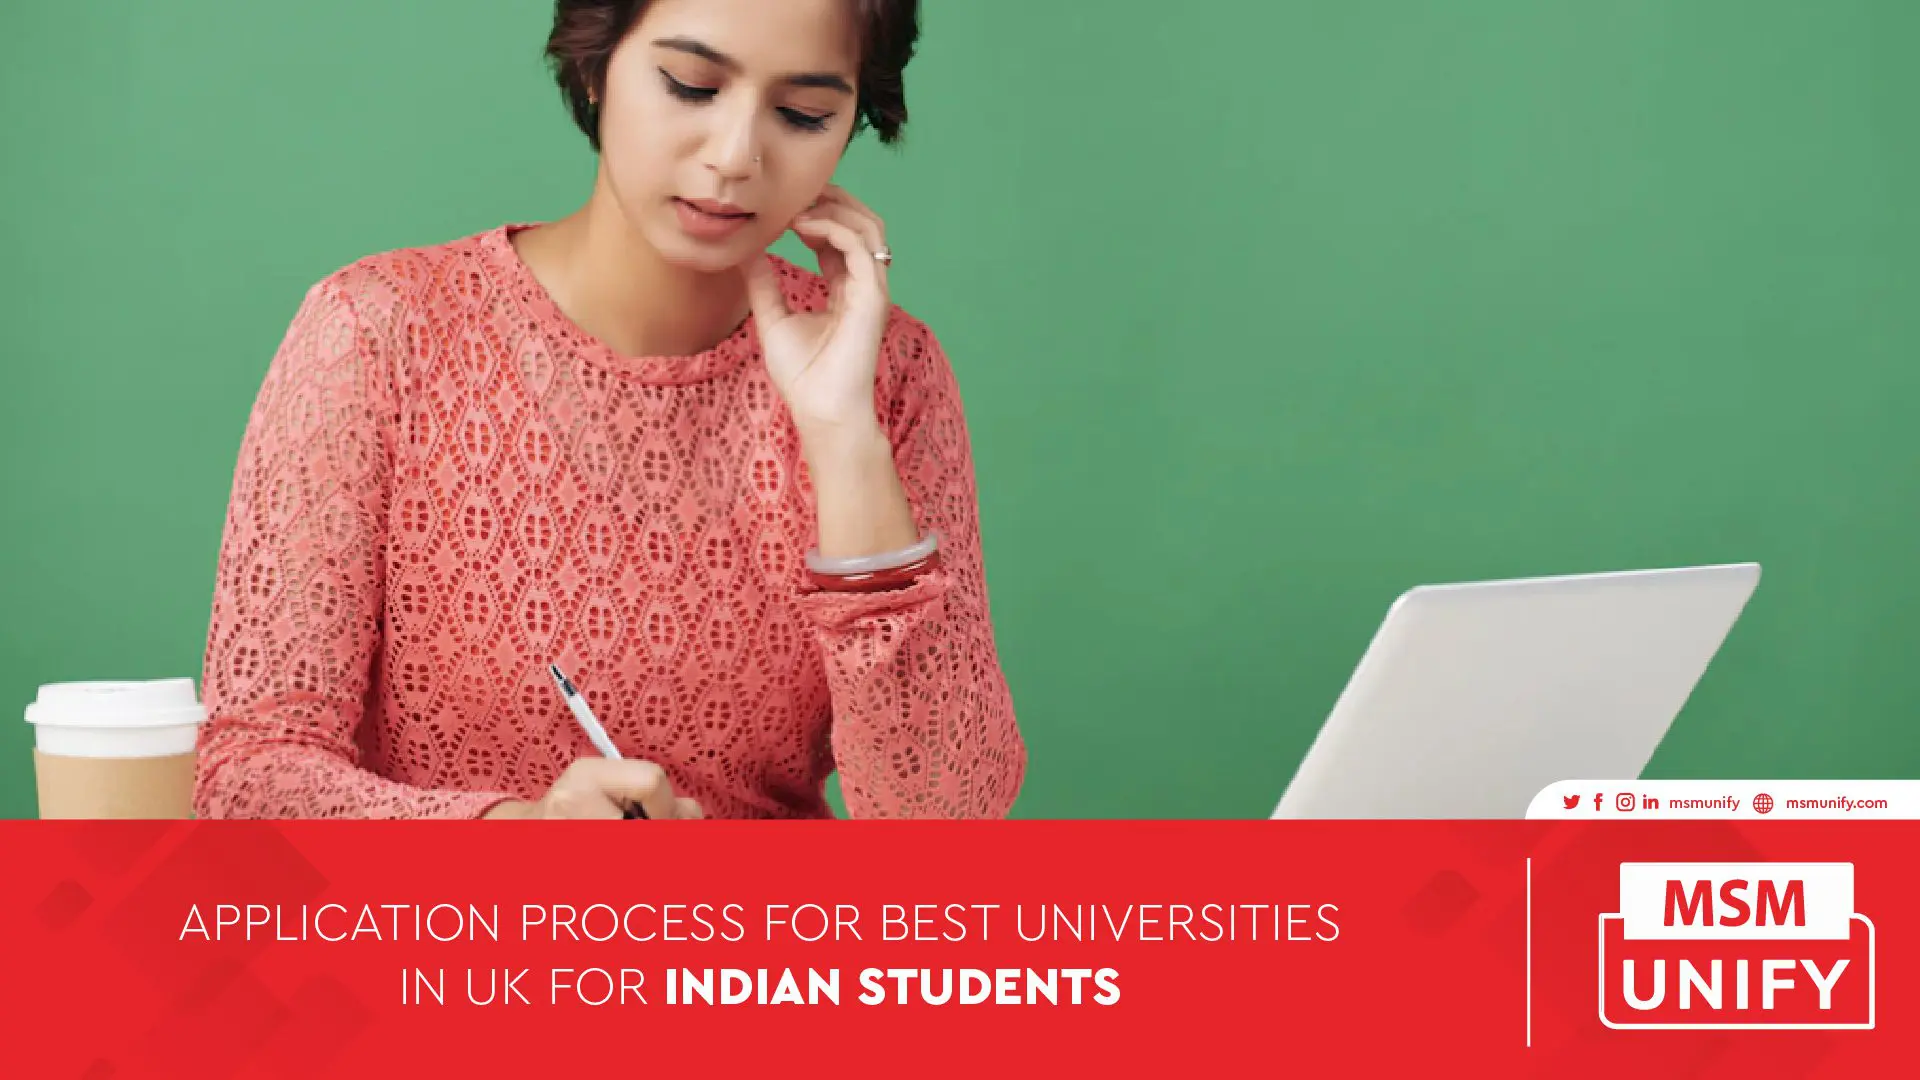 MSM Unify Application procees for best universities in UK for Indian Students